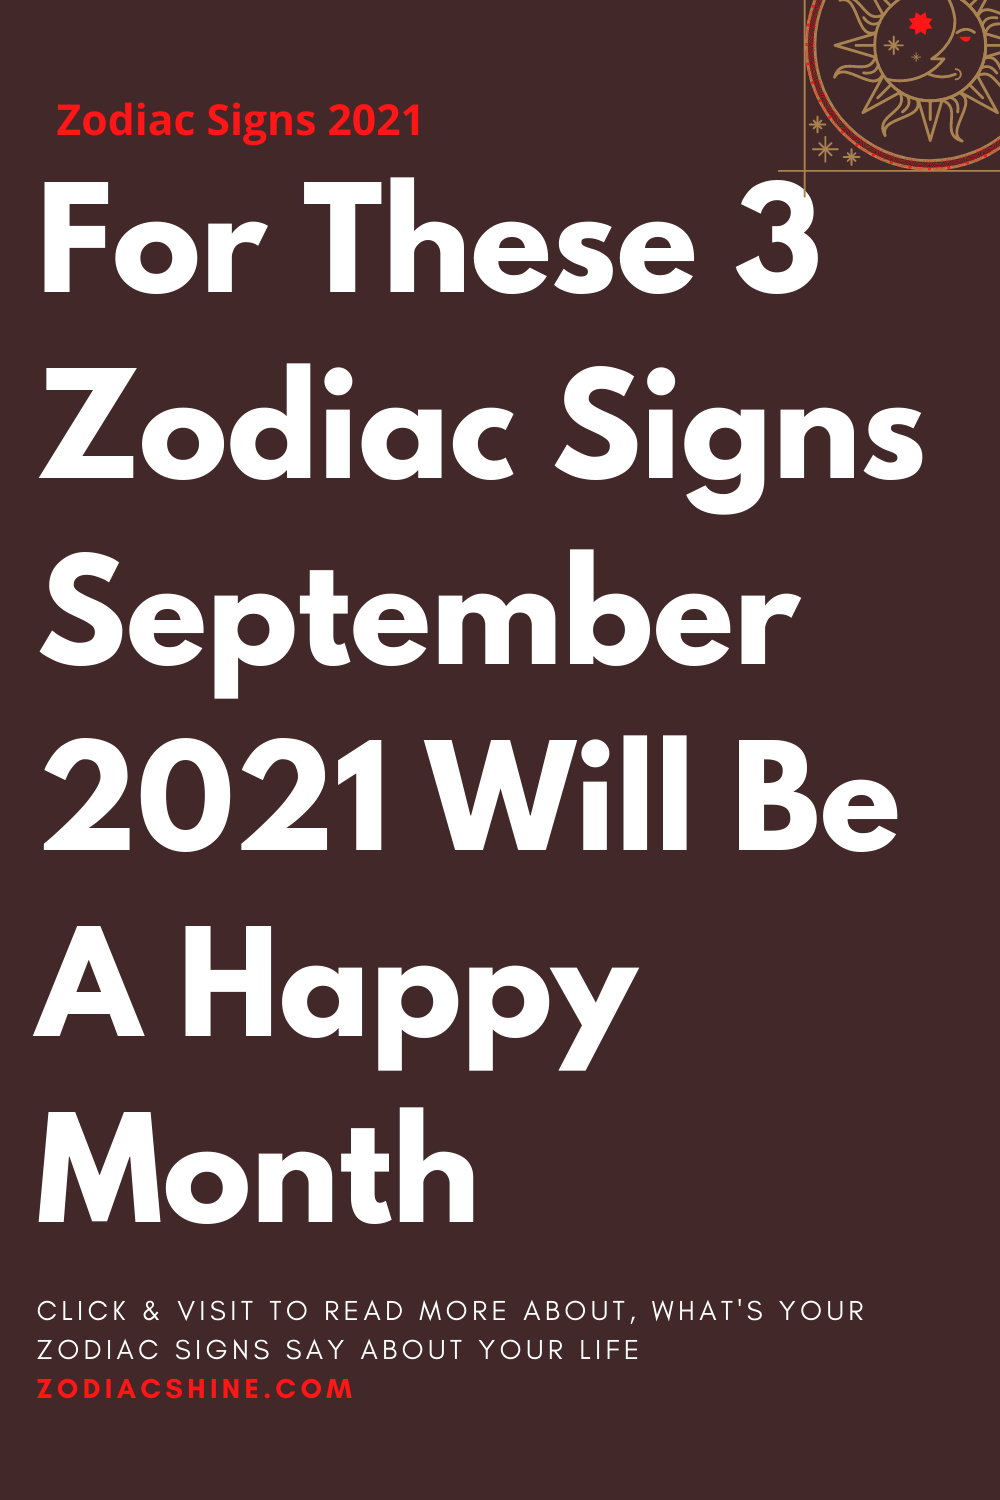 For These 3 Zodiac Signs September 2021 Will Be A Happy Month